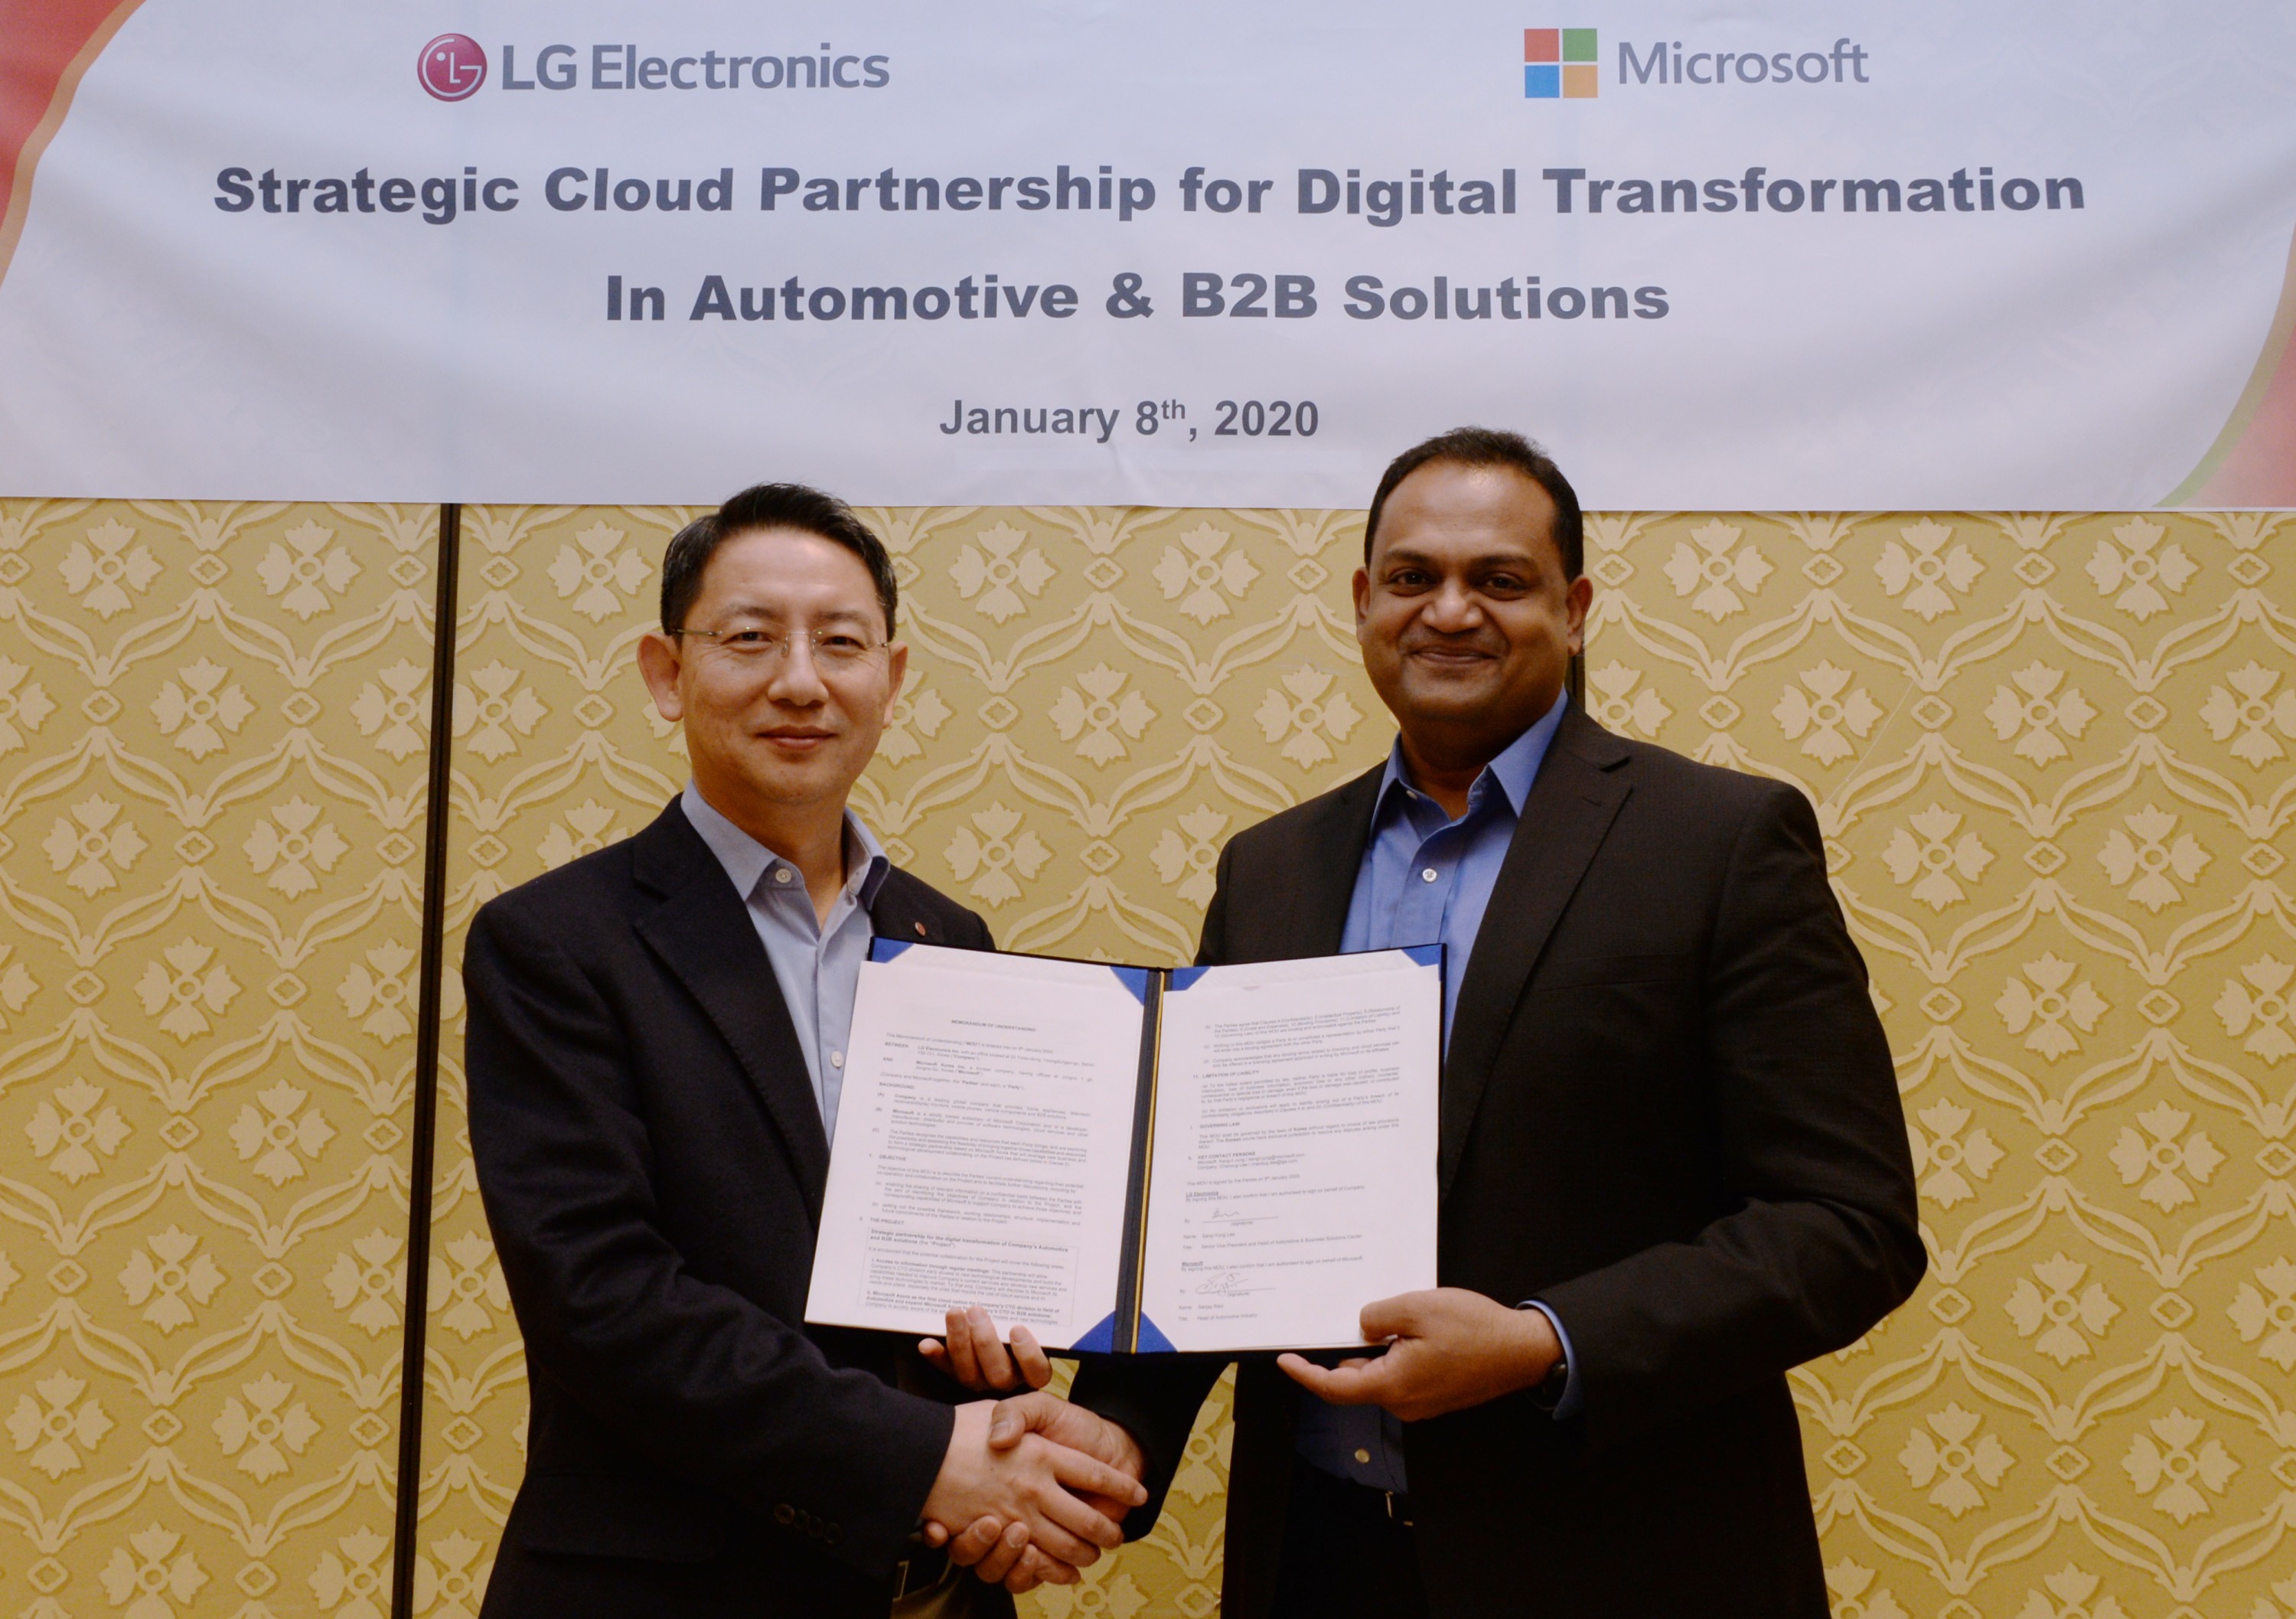 Dr. Lee Sang-yong, senior vice president and head of LG’s Automotive & Business Solutions Center, shakes hands with Microsoft’s Sanjay Ravi to commemorate their new partnership to accelerate the digital transformation of B2B Business